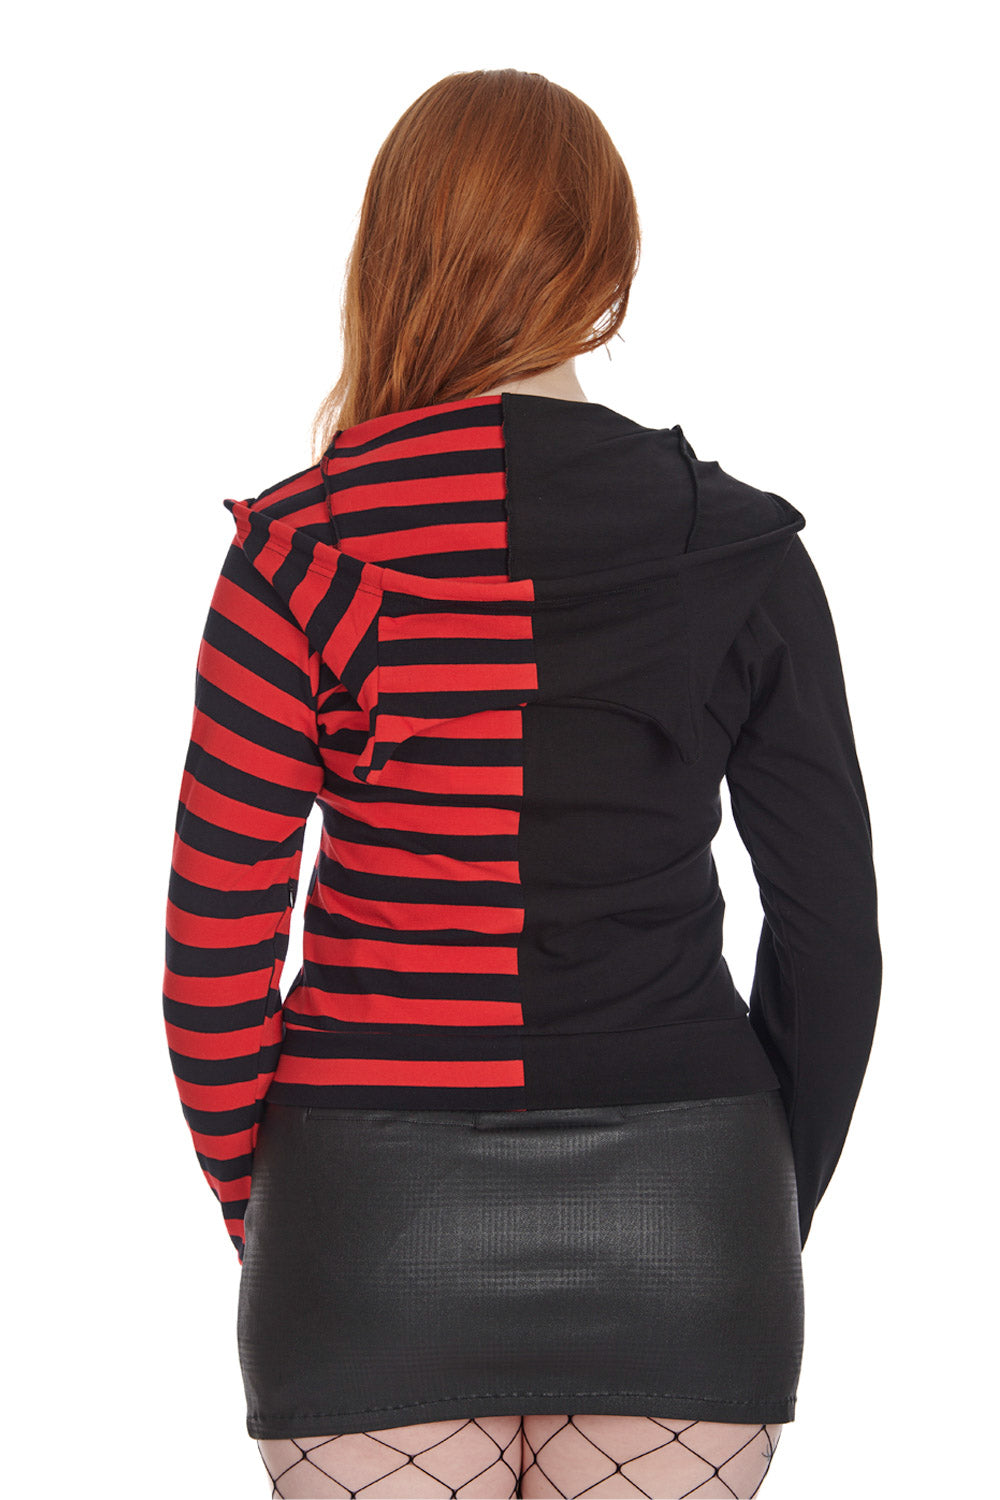 black and red striped emo hoodie